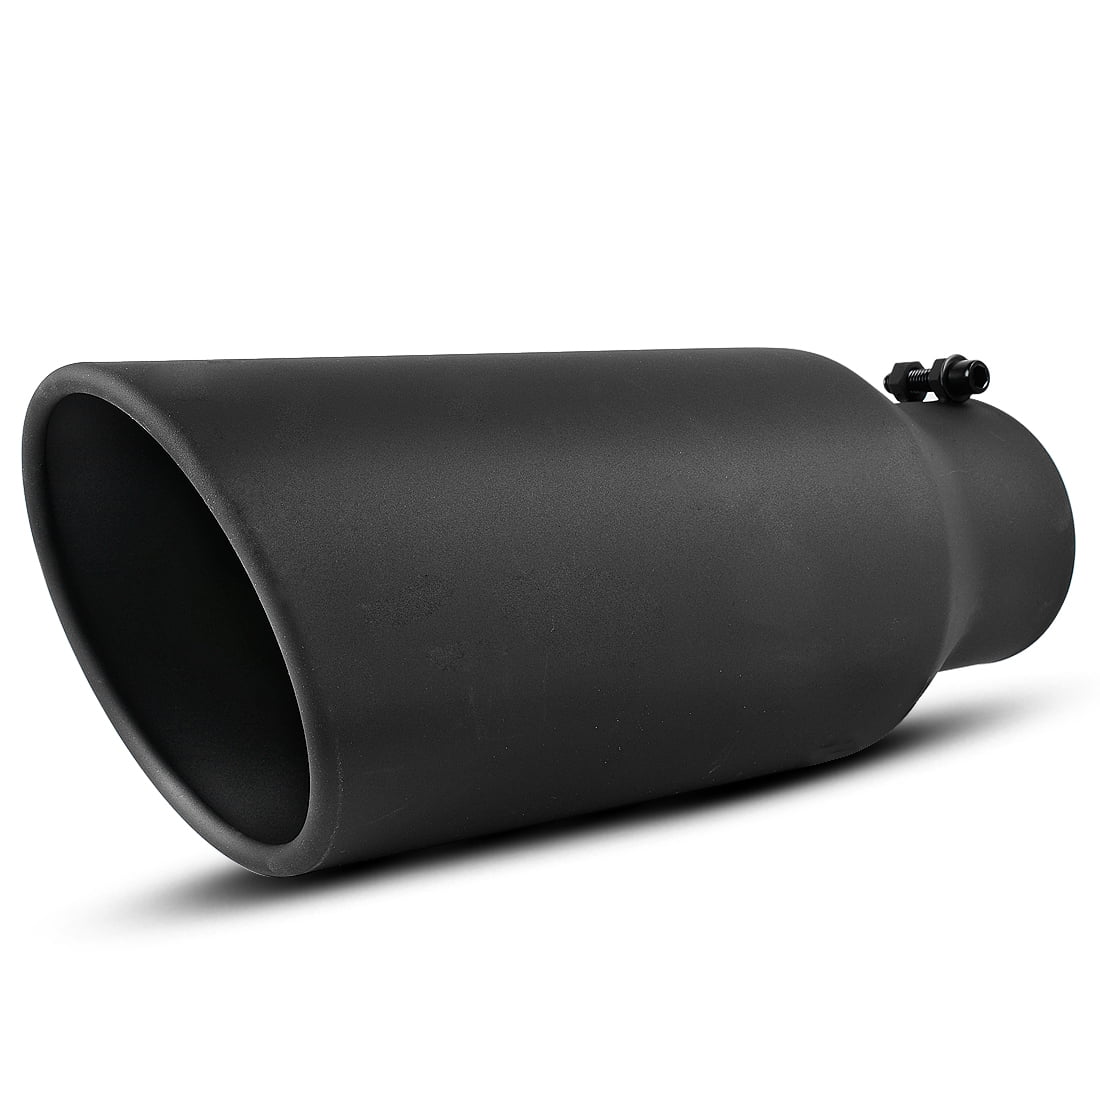 Exhaust Tip 4 Inch Inlet x 6 Inch Outlet x 15 Inch Long Black Stainless